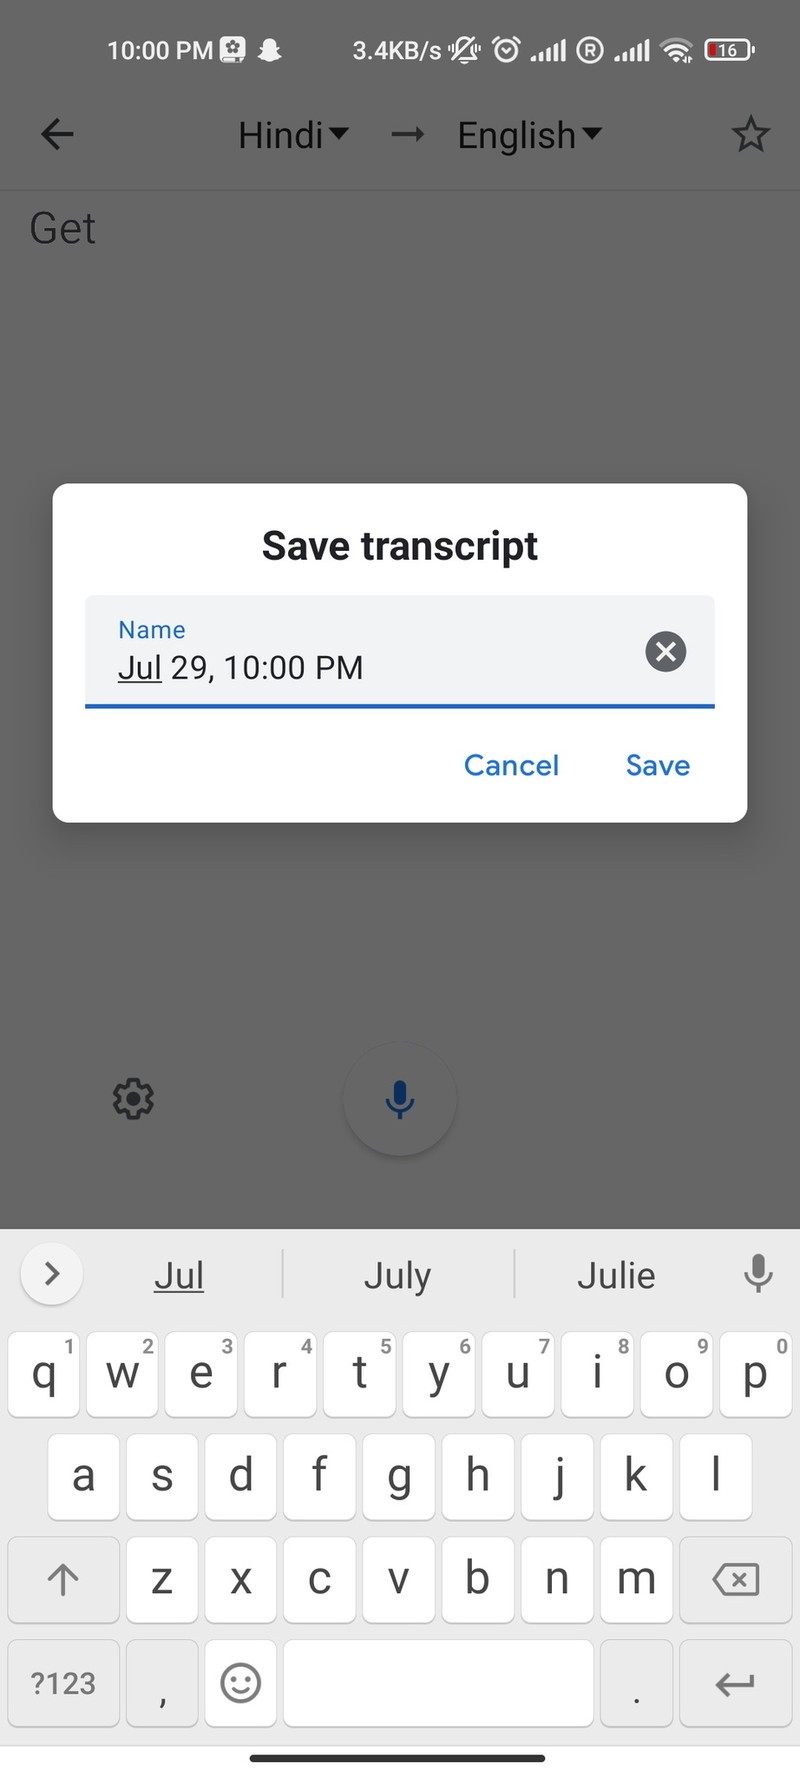 Save your Google Translate transcripts by following these steps